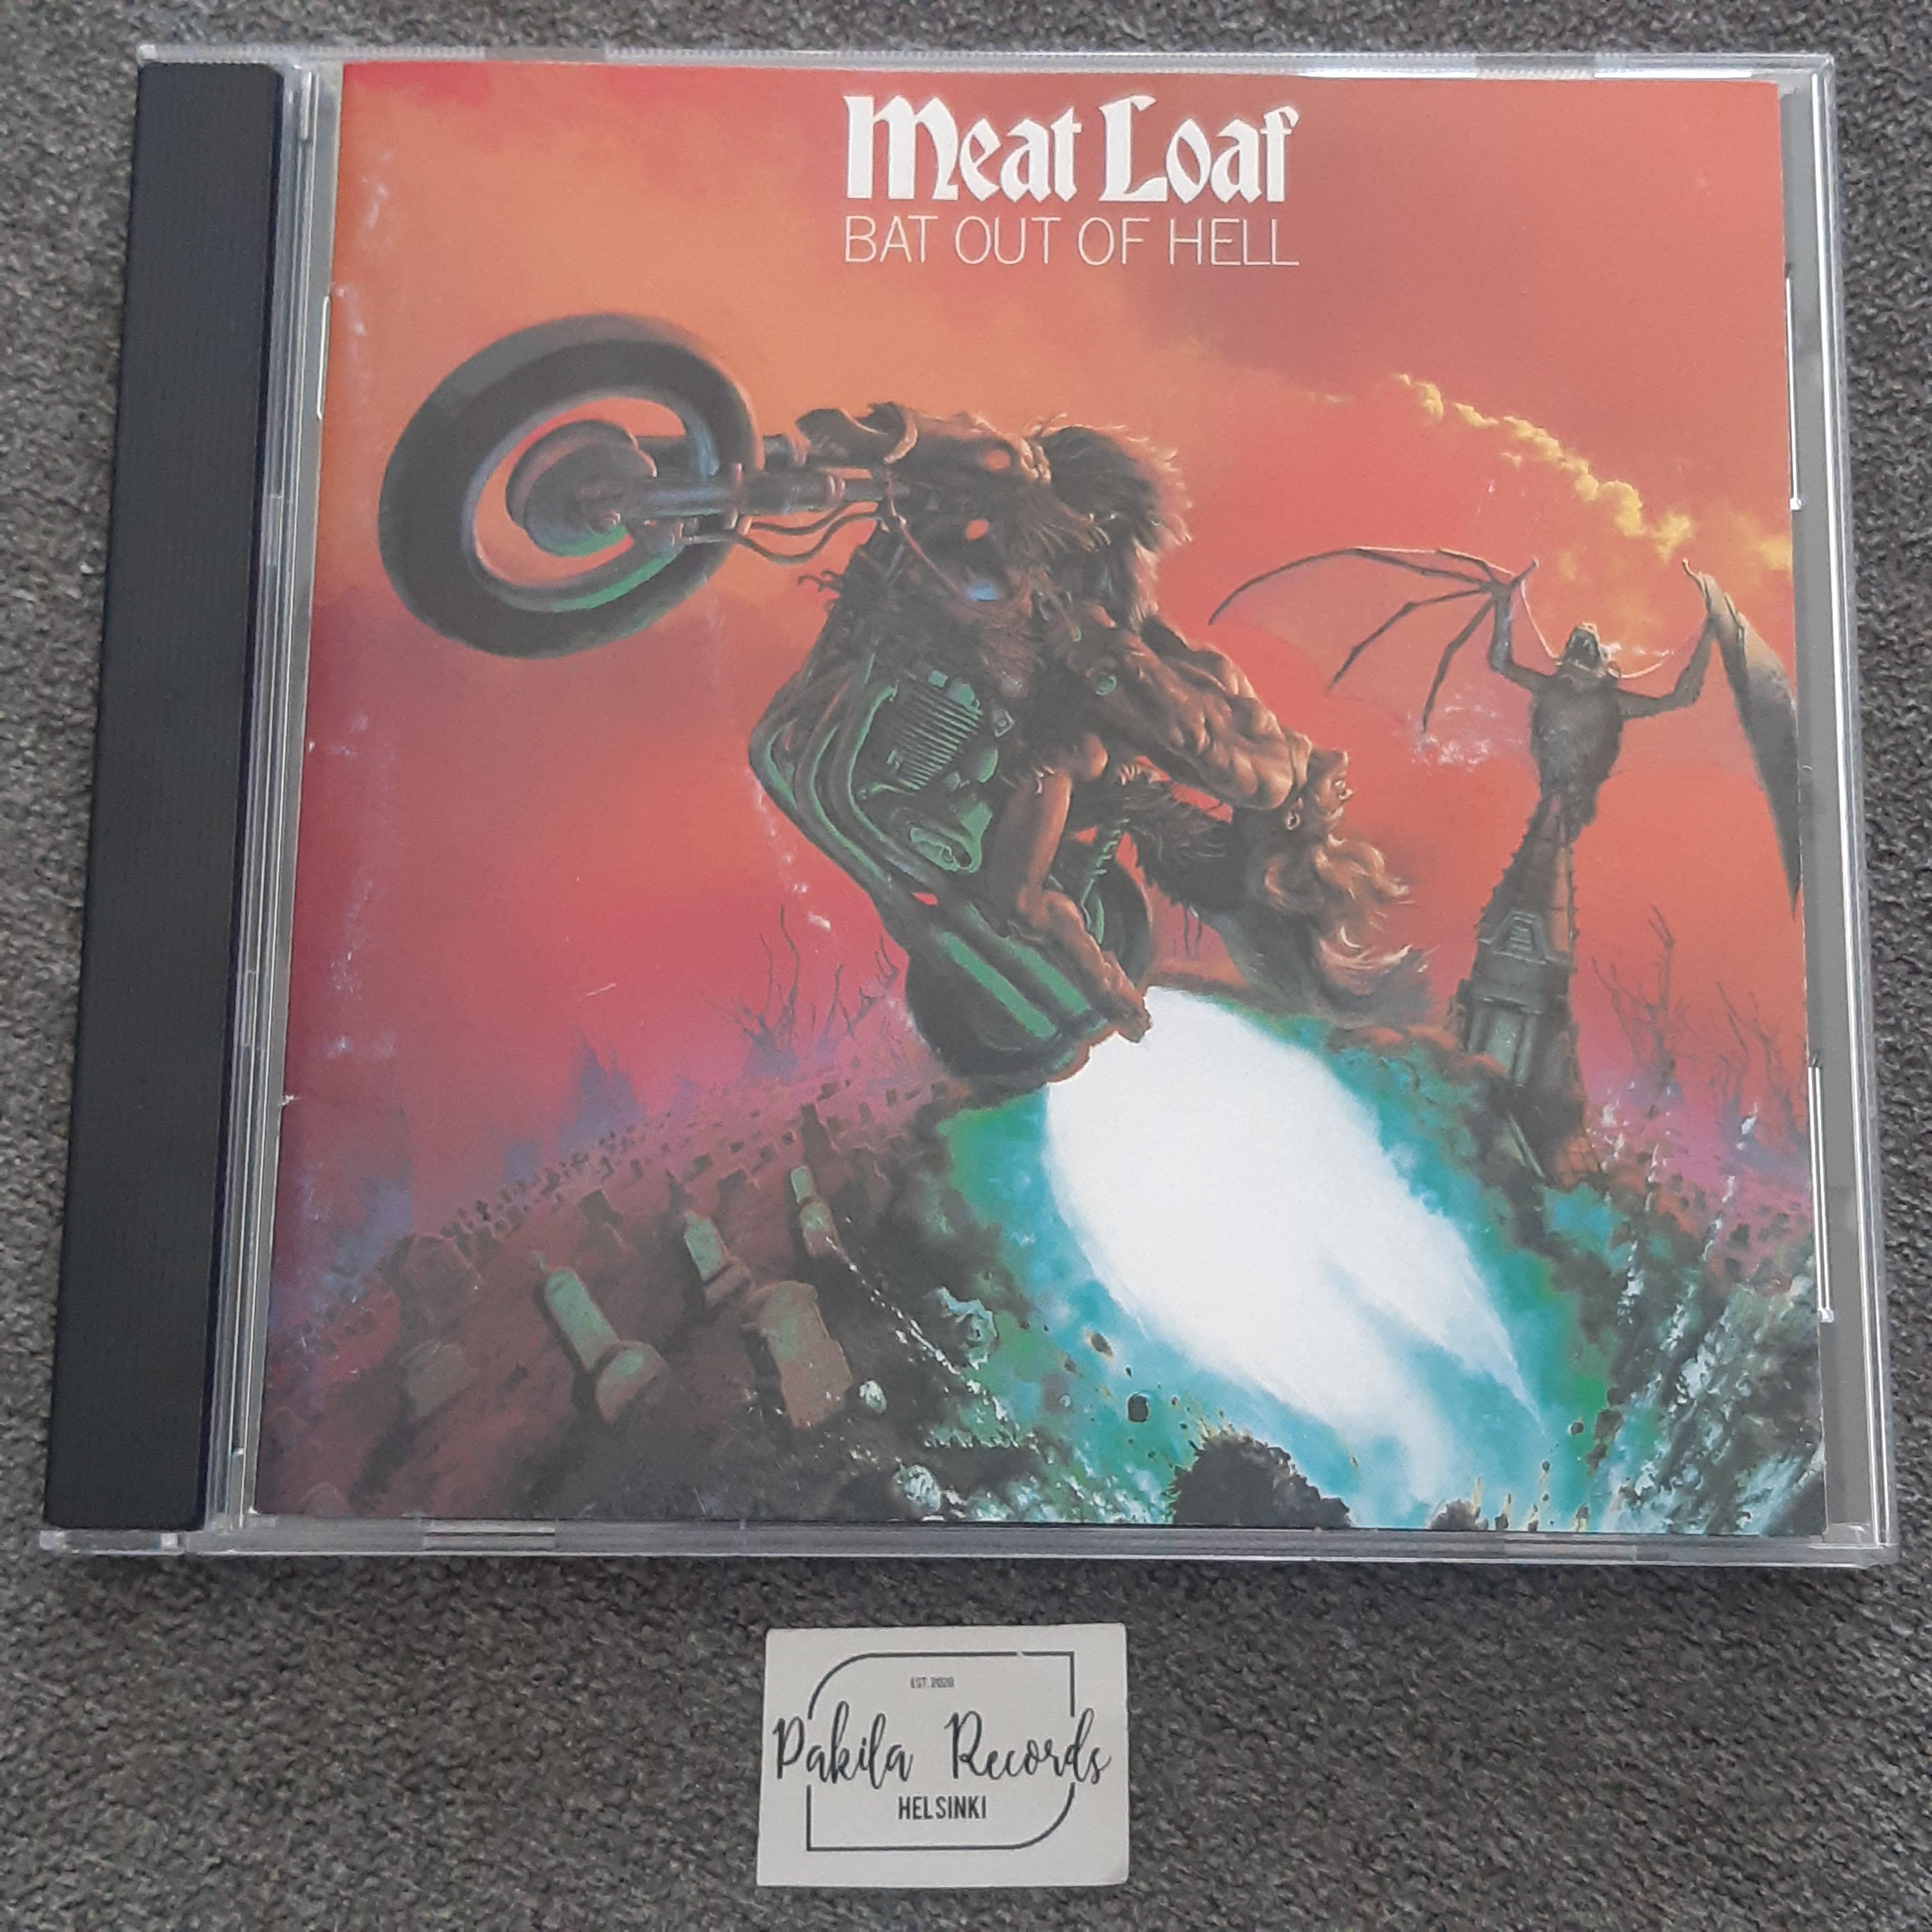 Meat Loaf - Bat Out Of Hell - CD (käytetty)